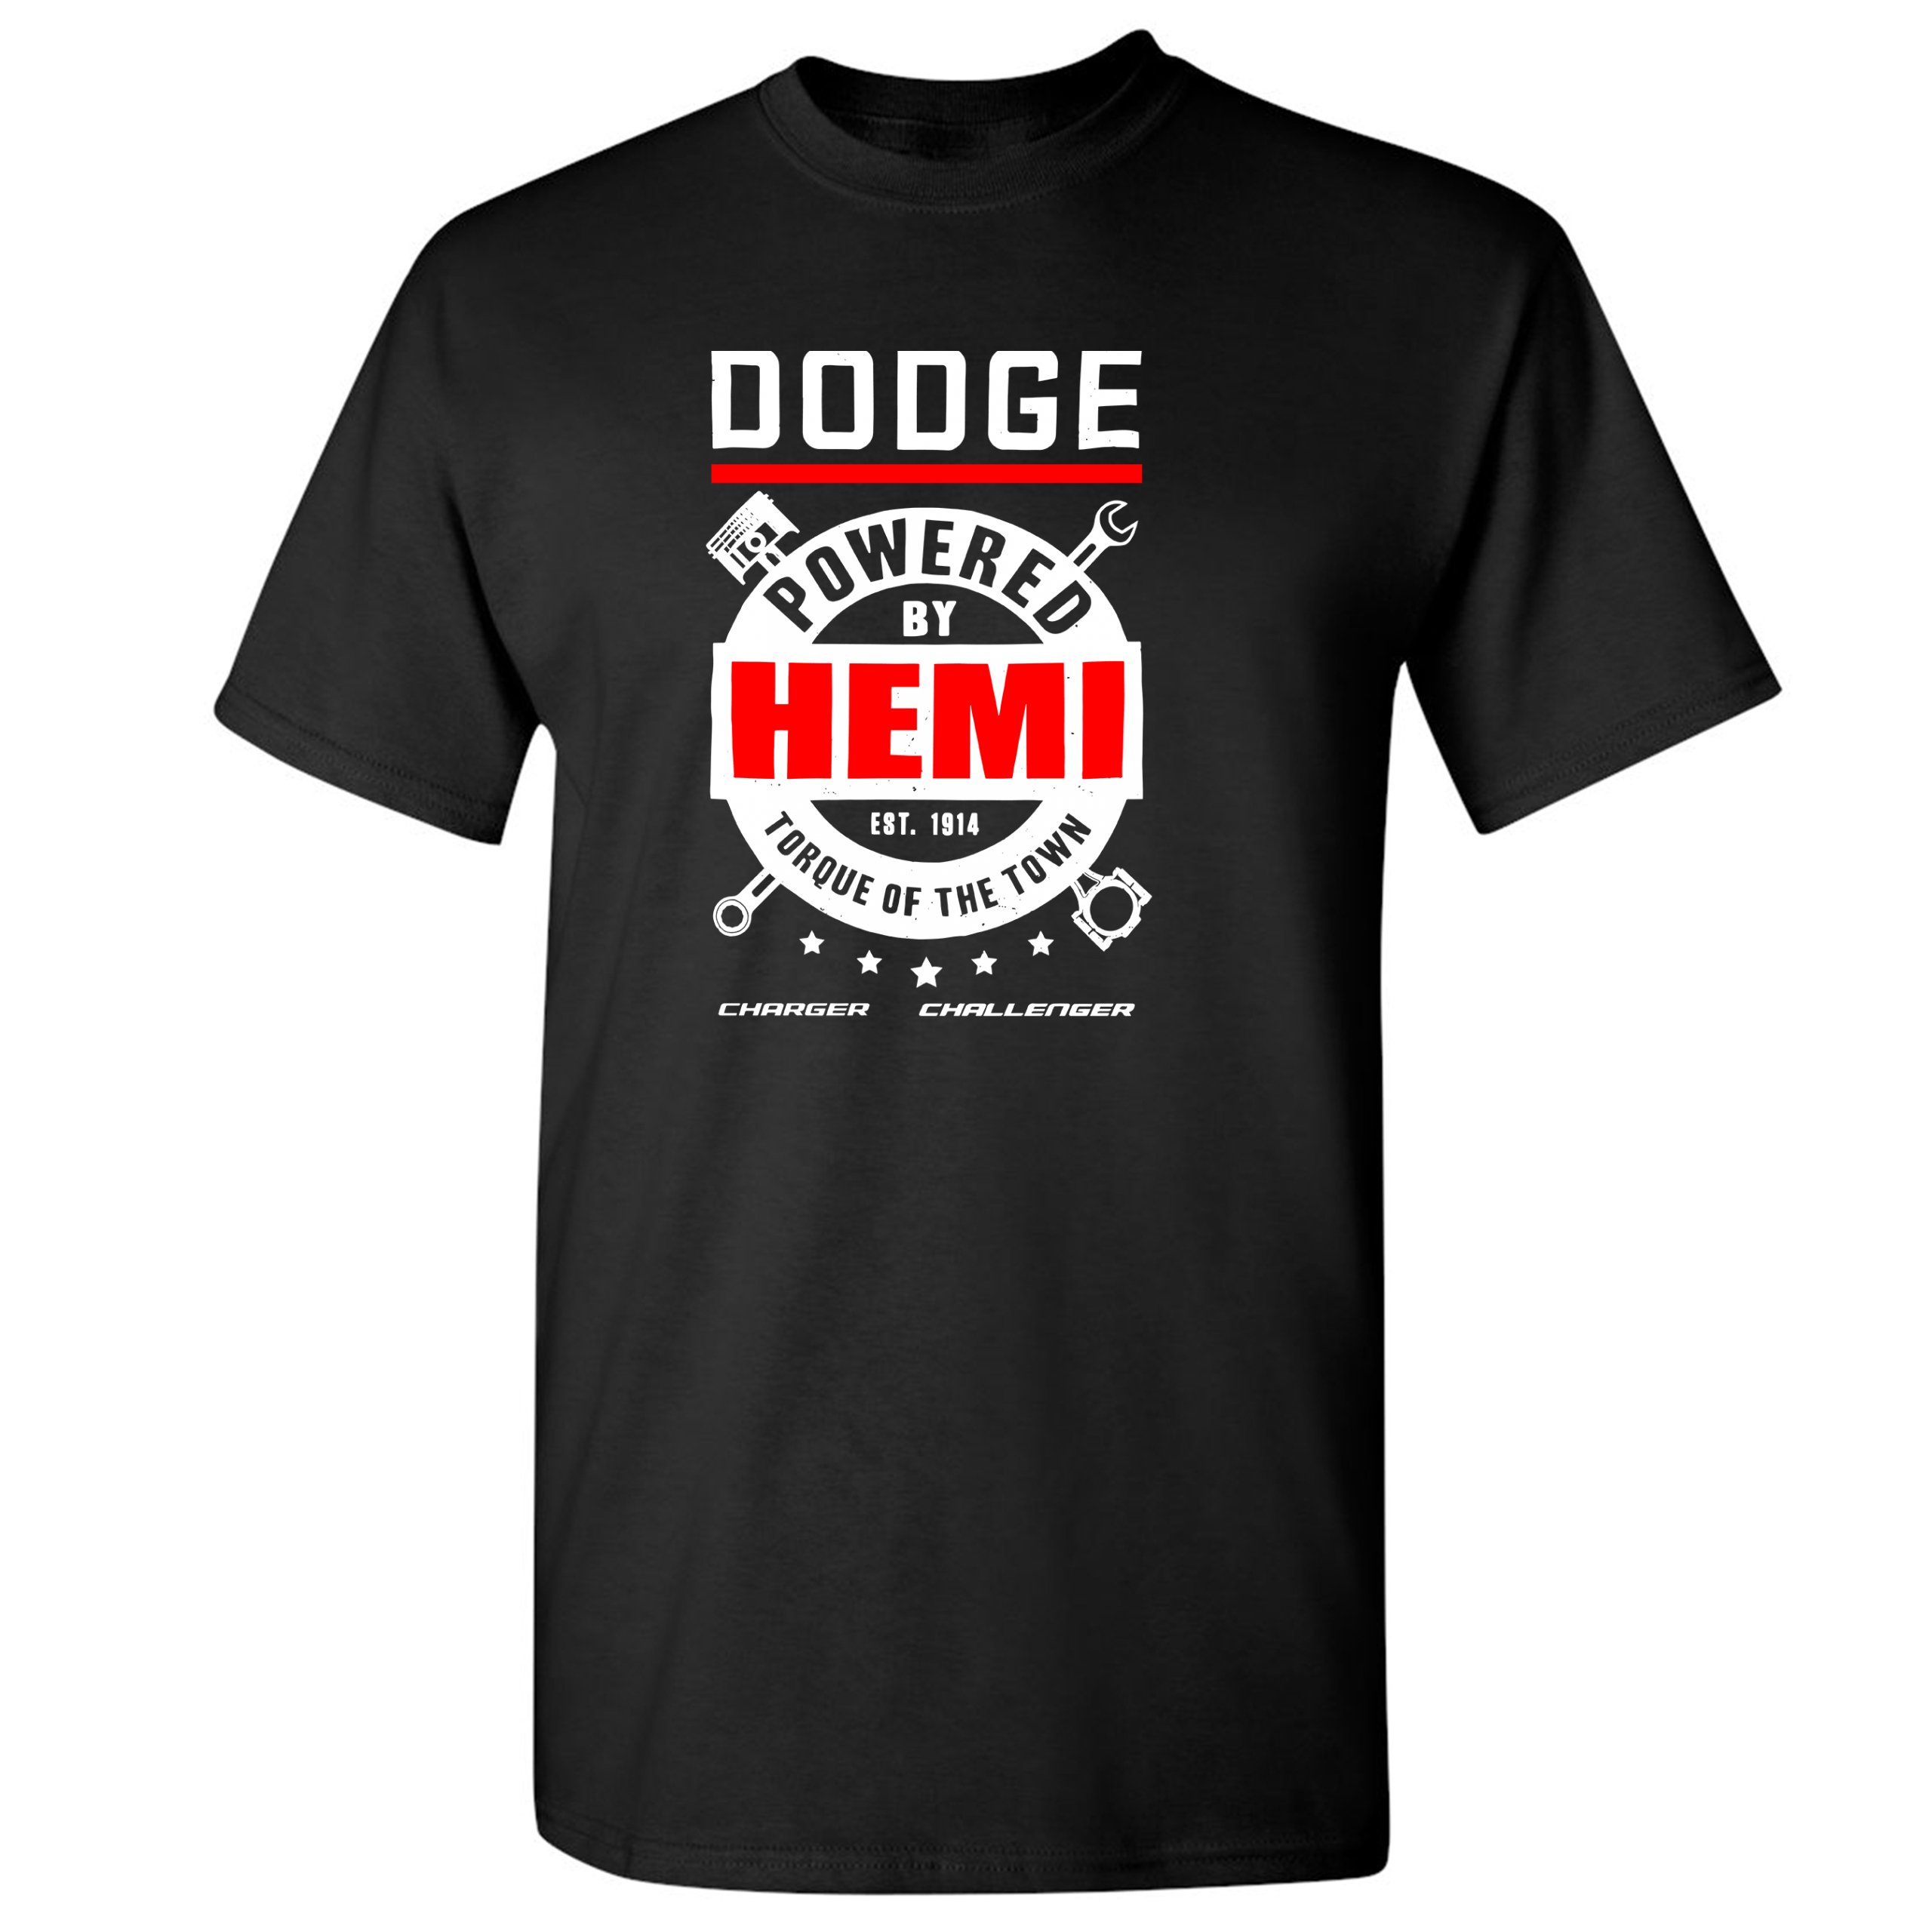 Dodge Powered by HEMI Double Sided T-Shirt  Licensed Charger Challenger 4x4